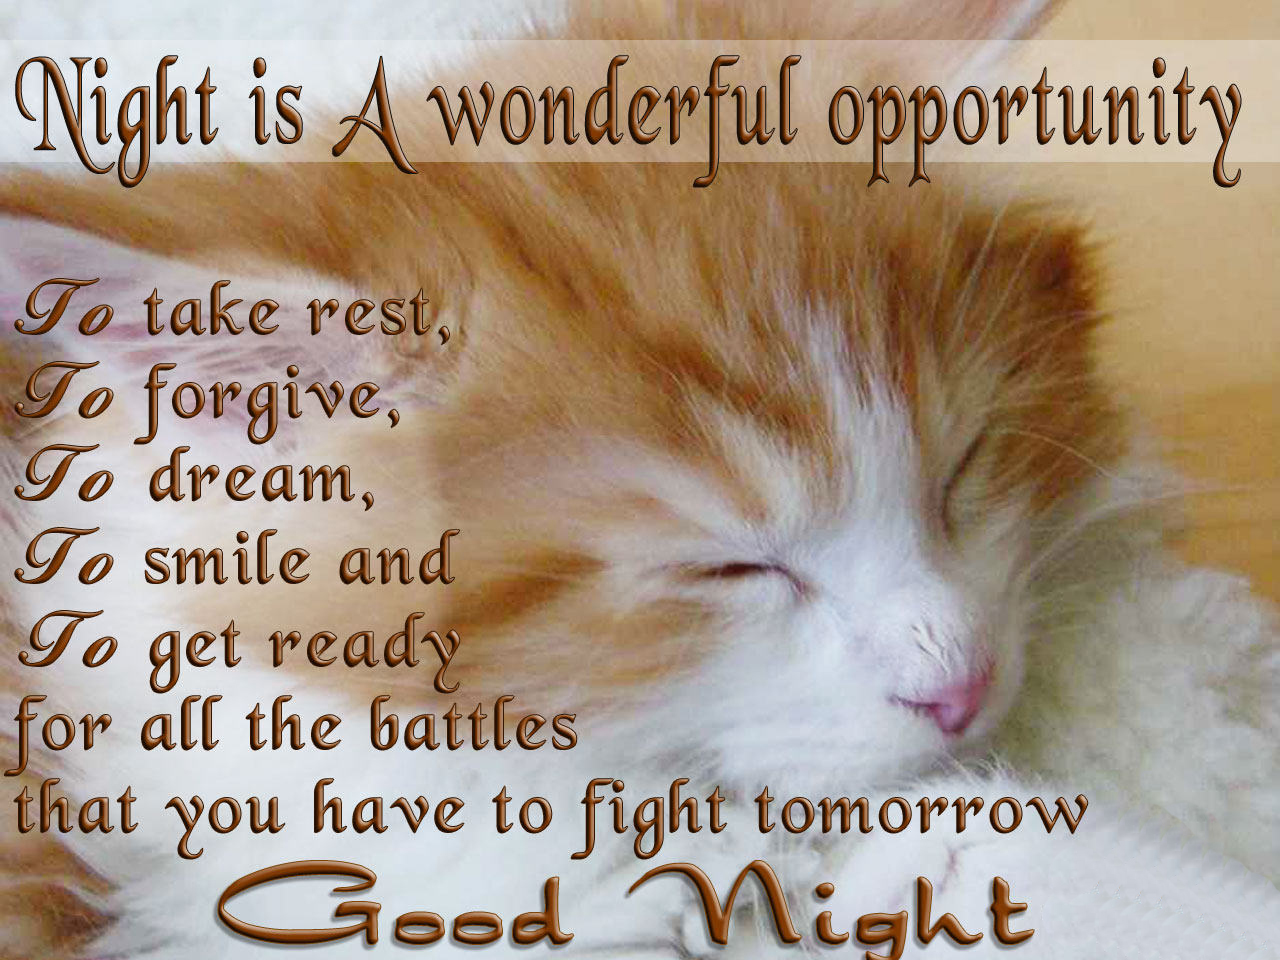 Free Good Night Wallpapers - Download Images Of Good Night Wishes - HD Wallpaper 